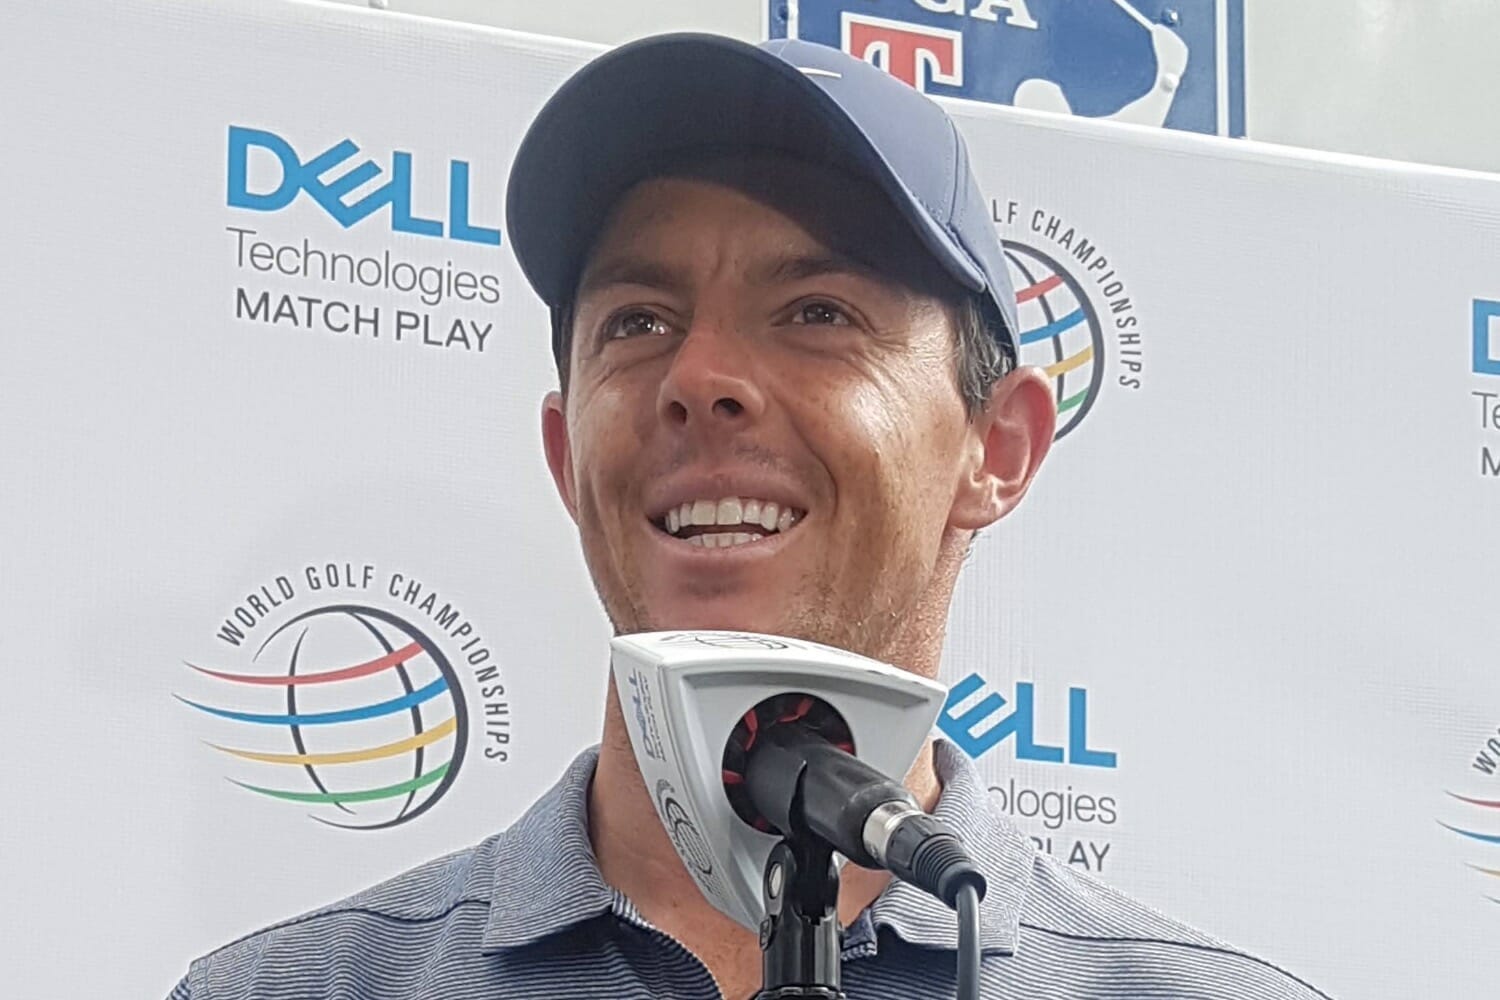 McIlroy shrugs off Sunday hangover for first win in Austin